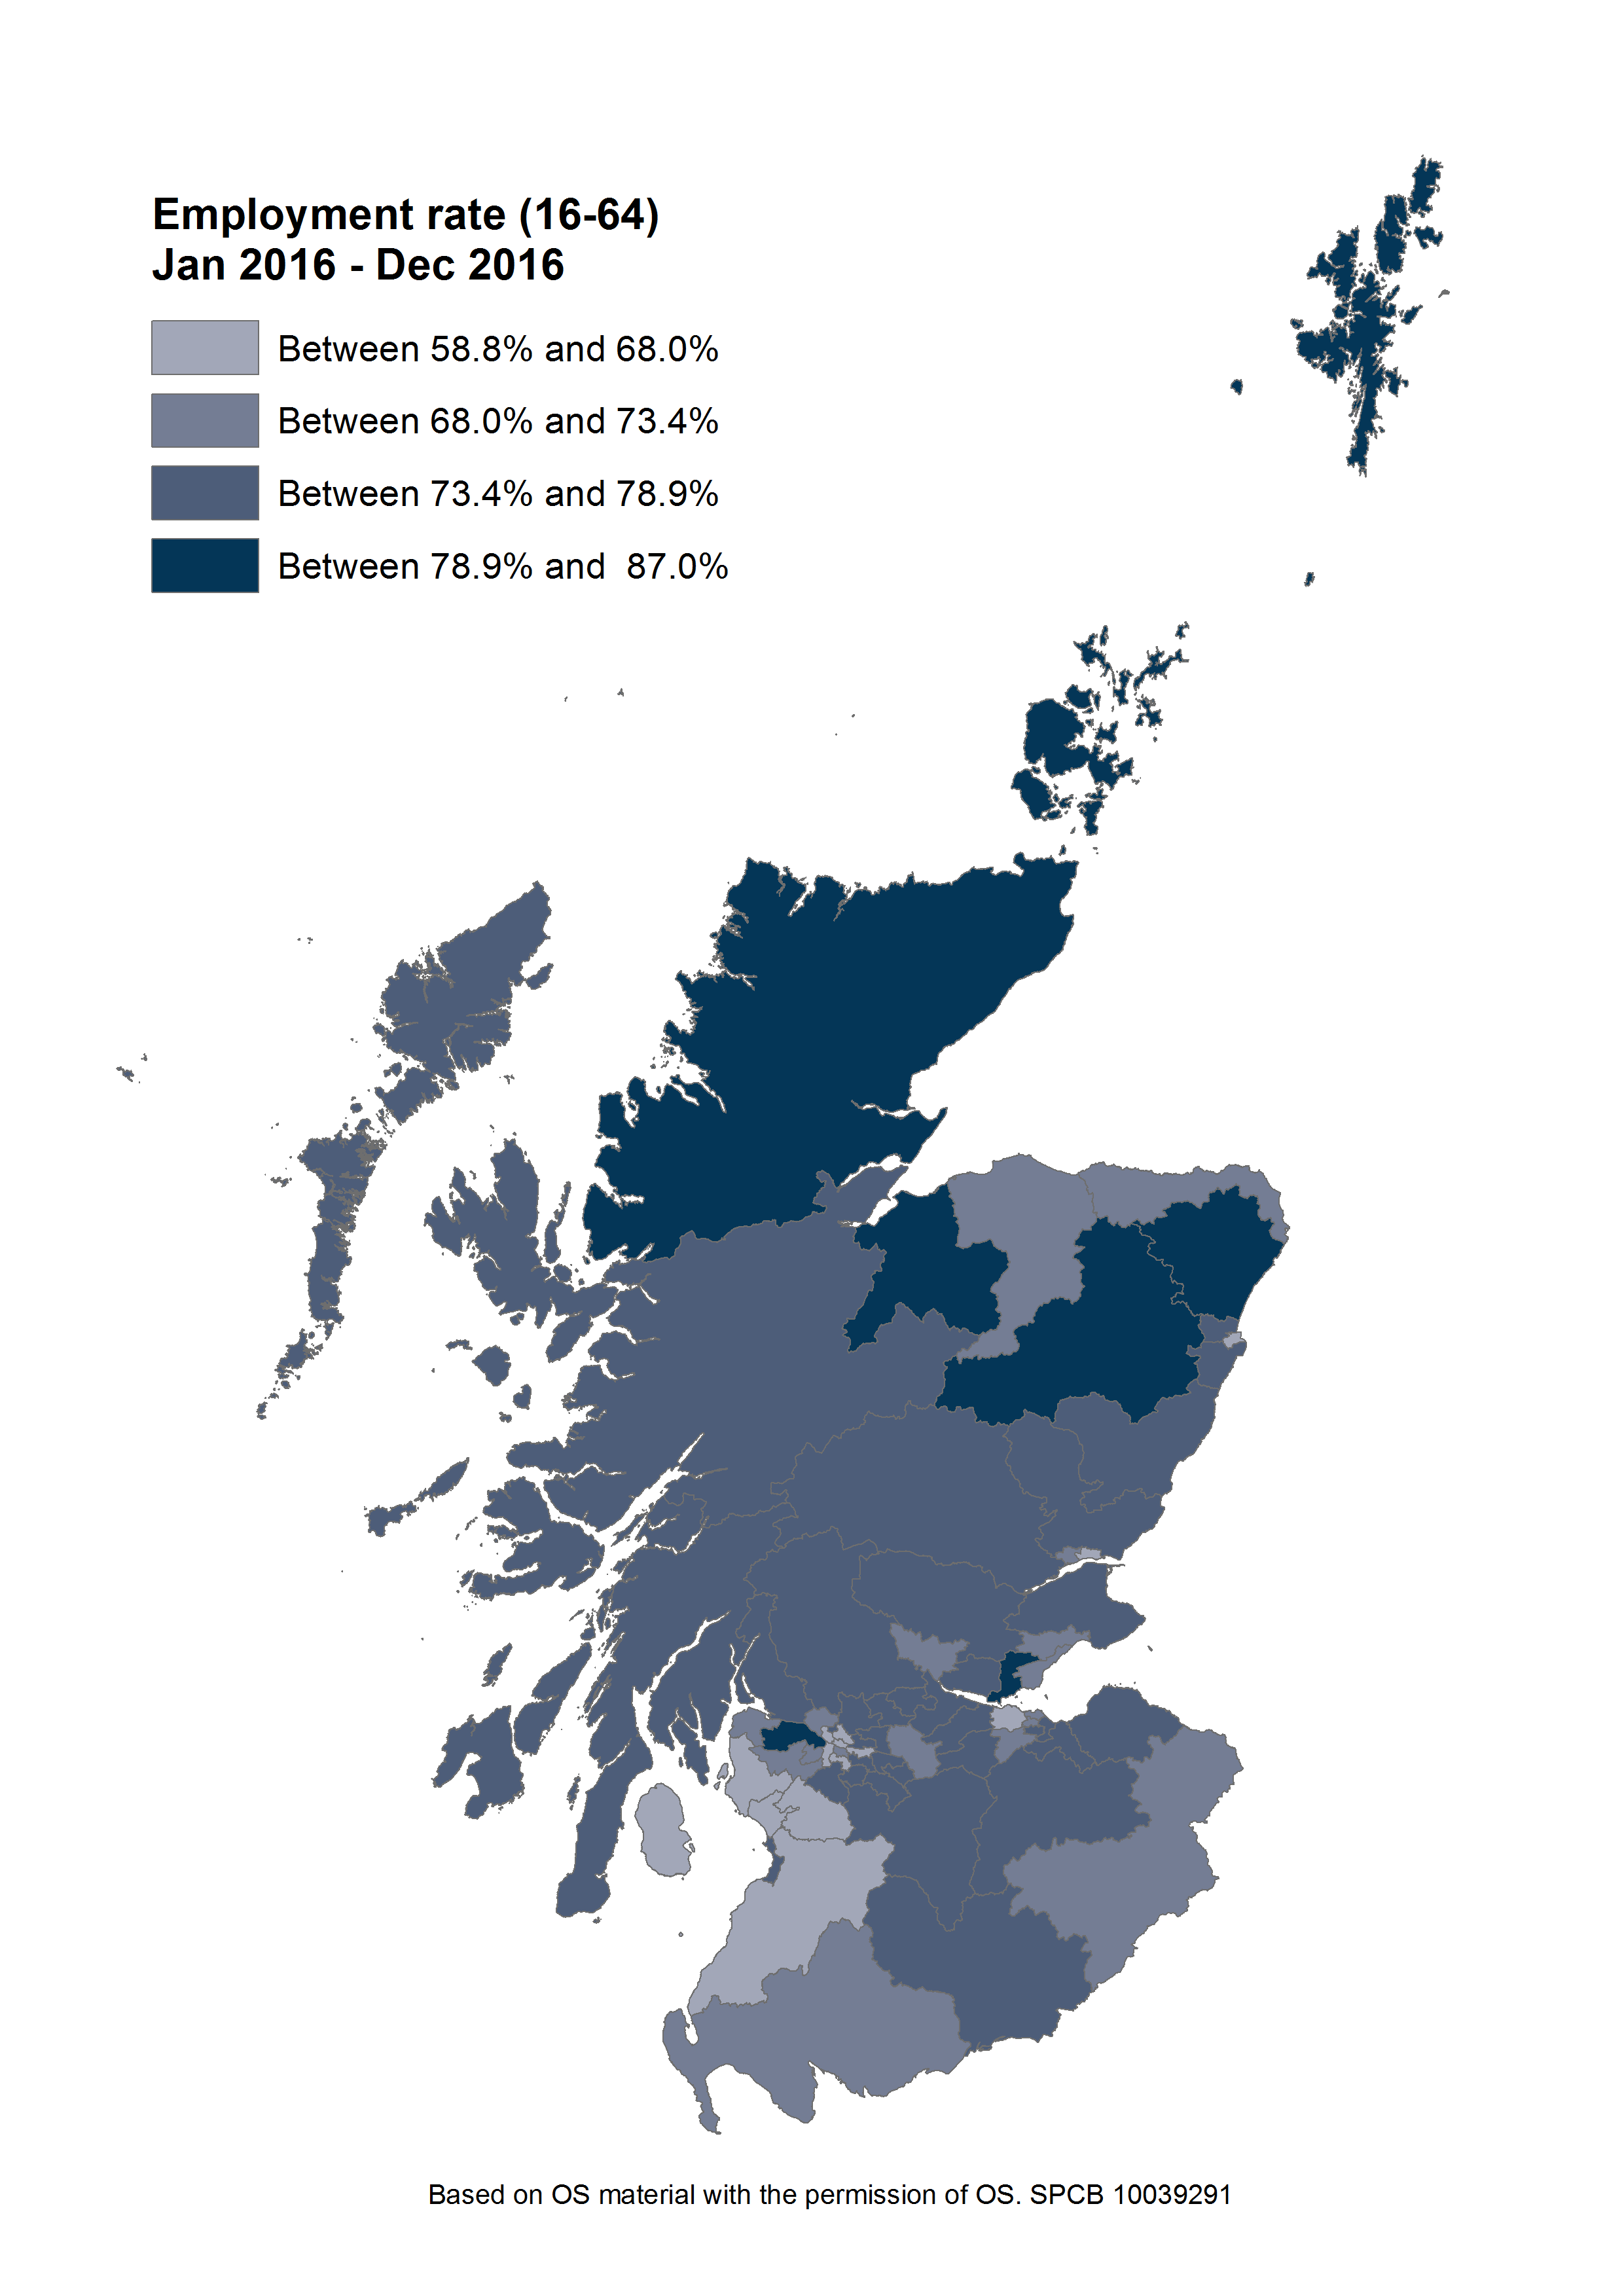 Employment rates for each Scottish parliament constituency. 